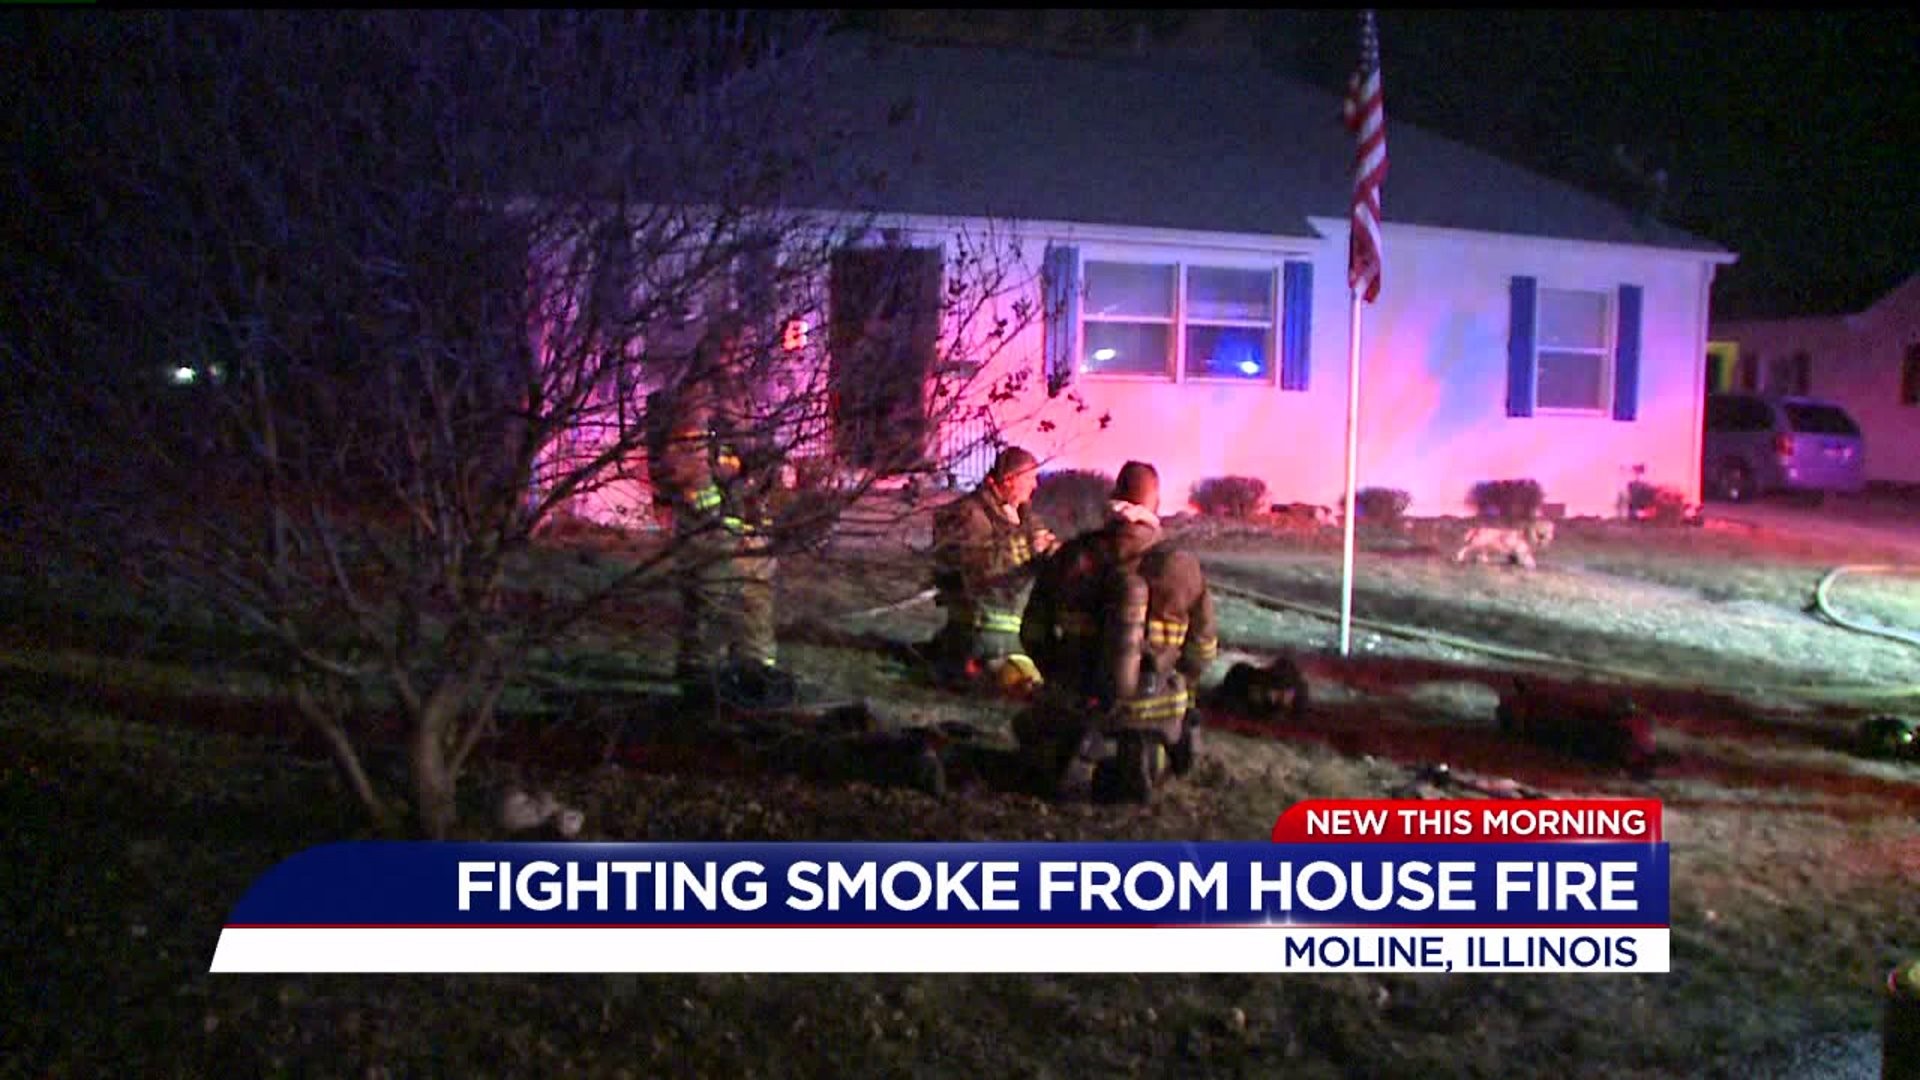 Friday Morning House Fire in Moline